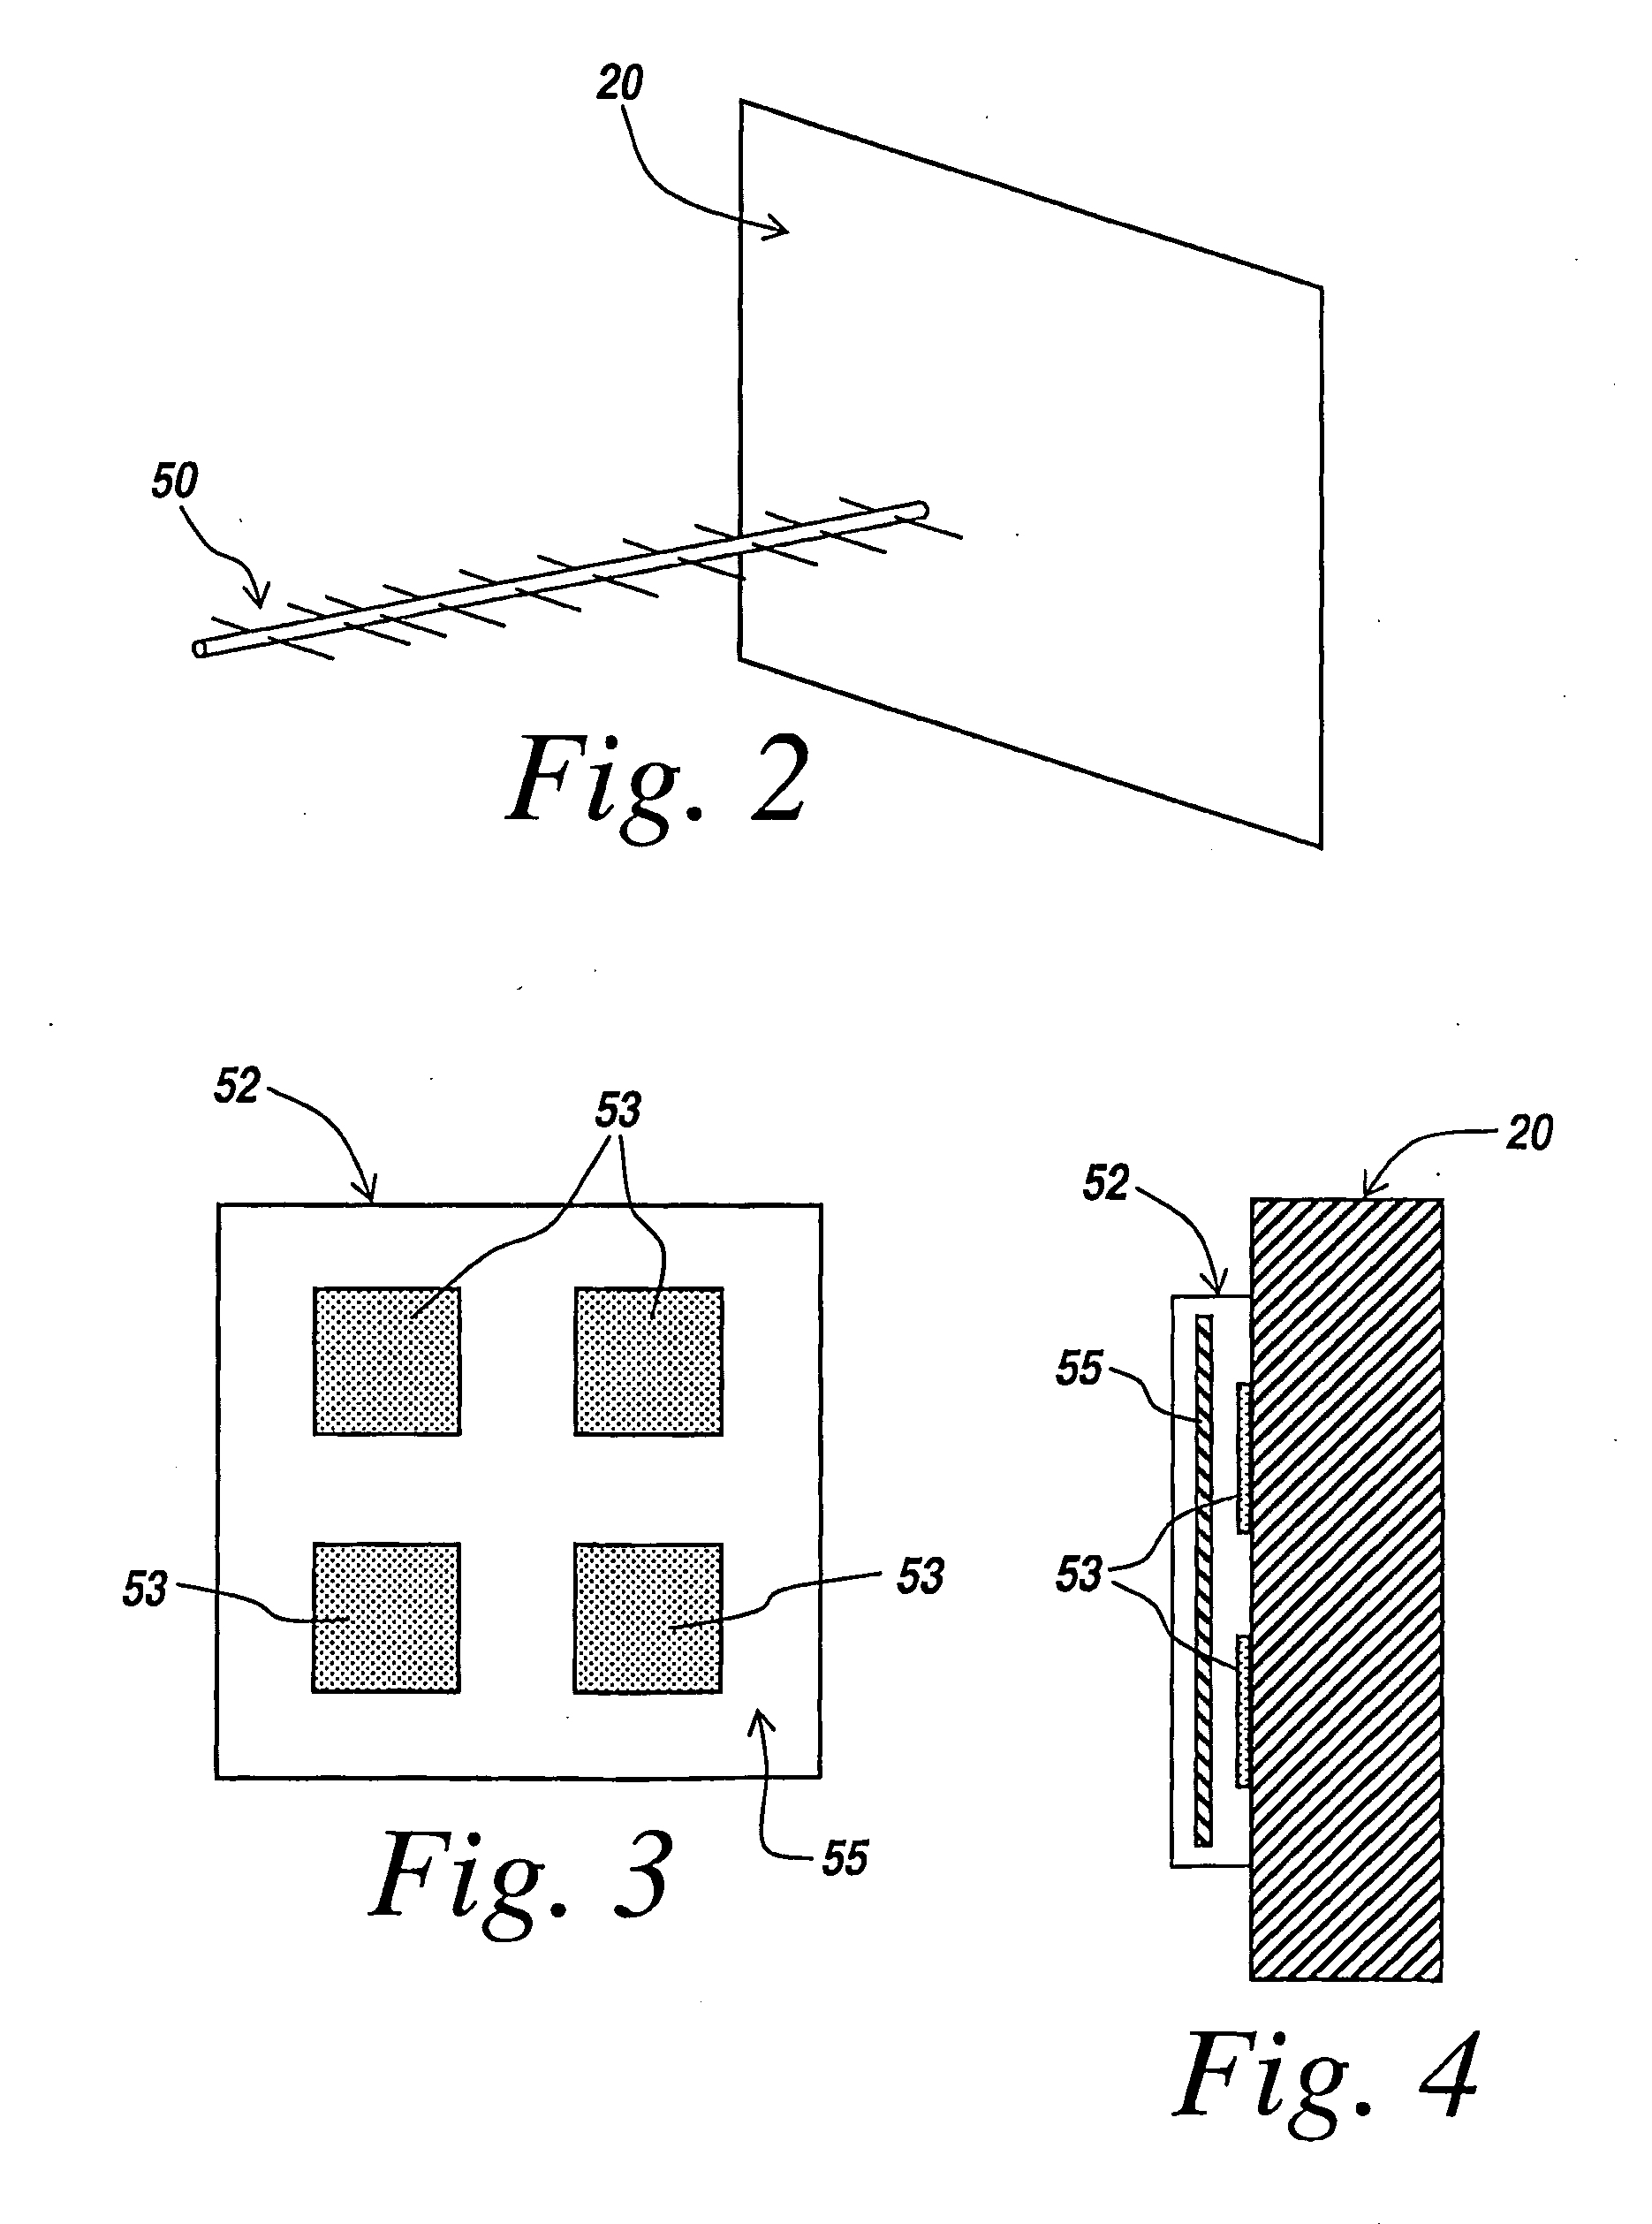 Through-the-wall motion detector with improved antenna